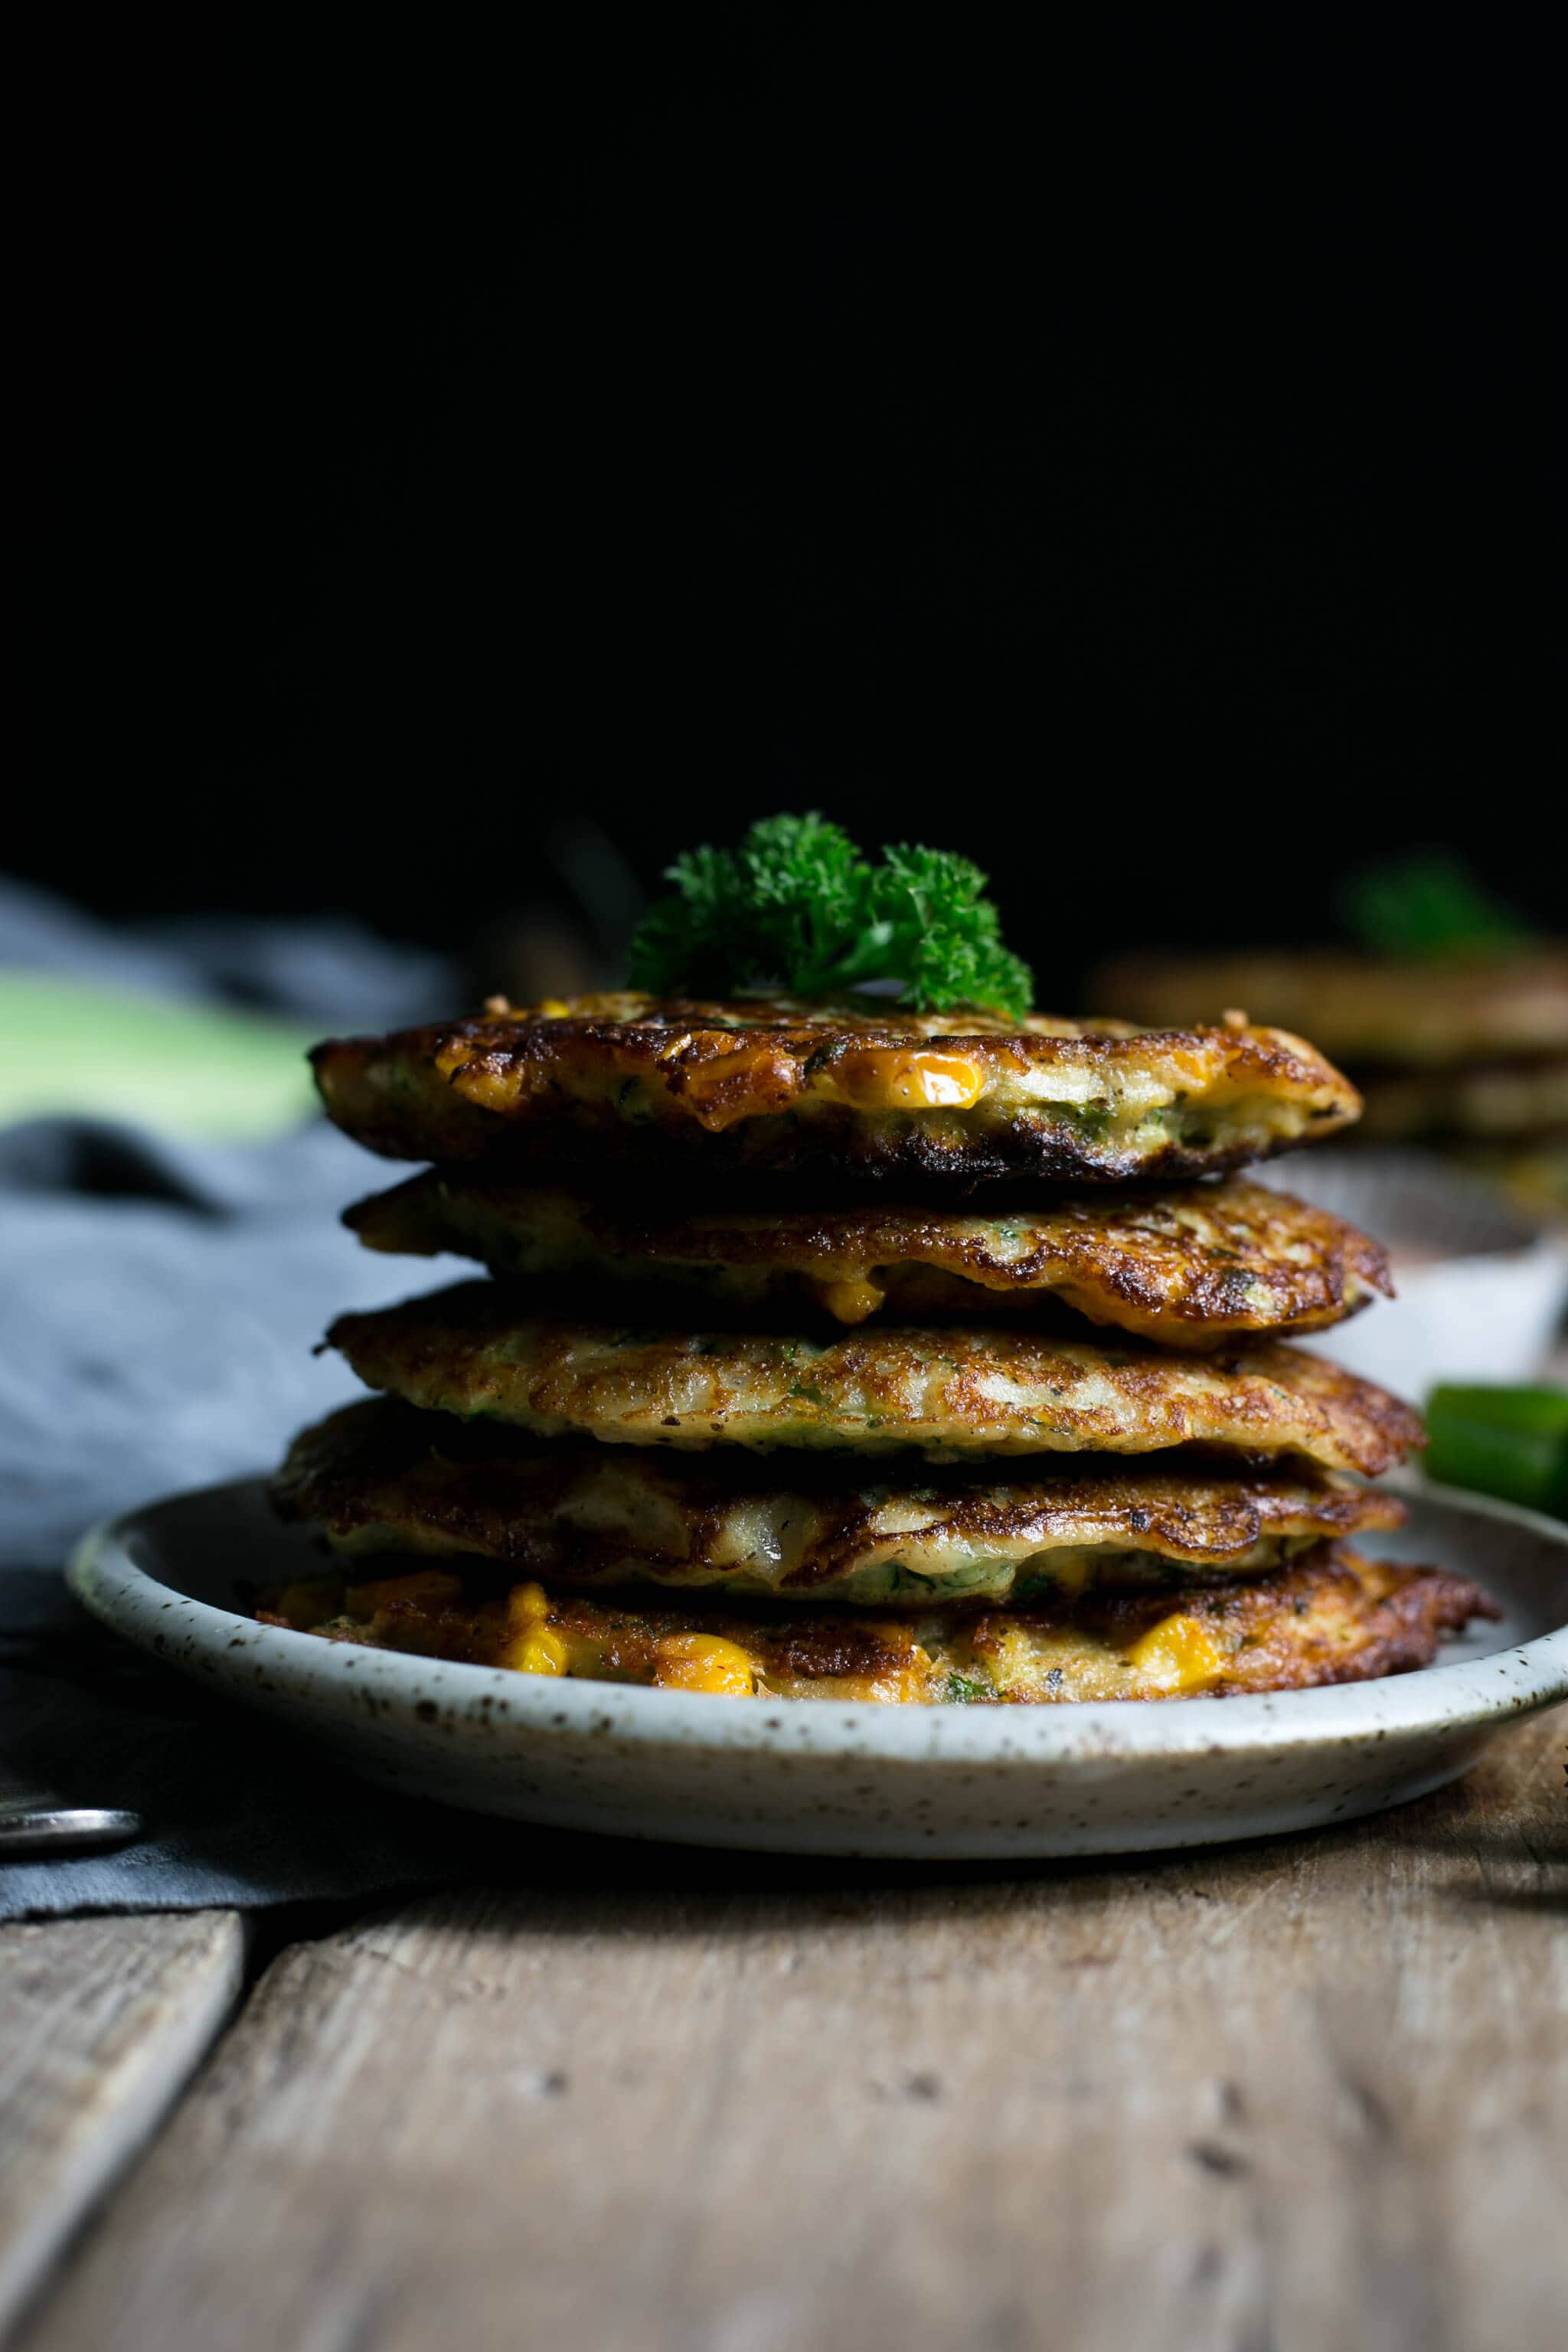 Delicious courgette and corn fritters with hot Sriracha dip | via @annabanana.co